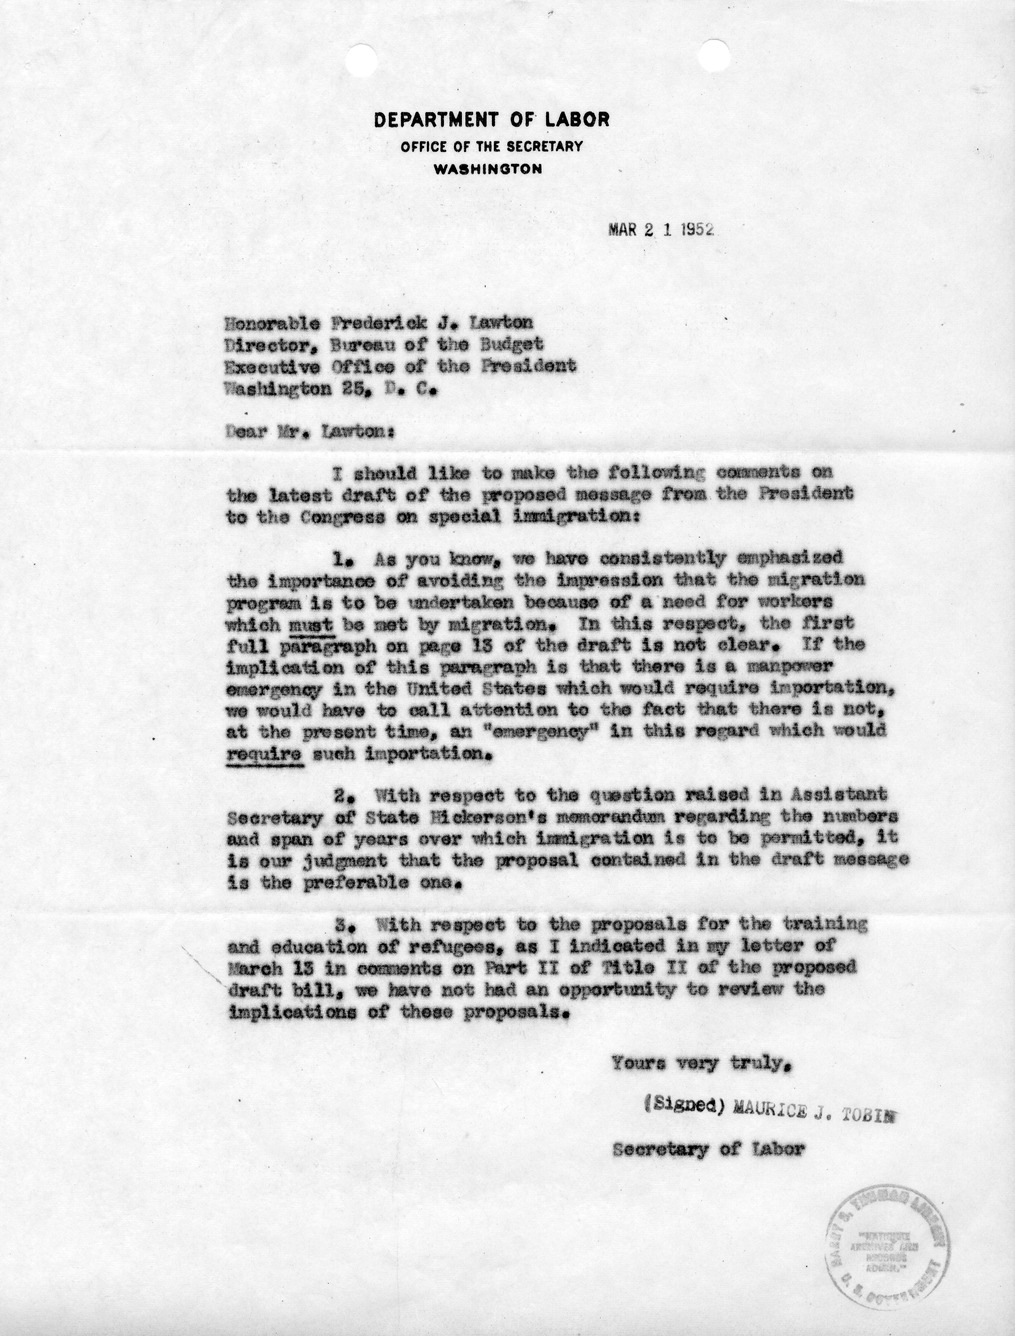 Letter from Secretary of Labor Maurice Tobin to Frederick Lawton